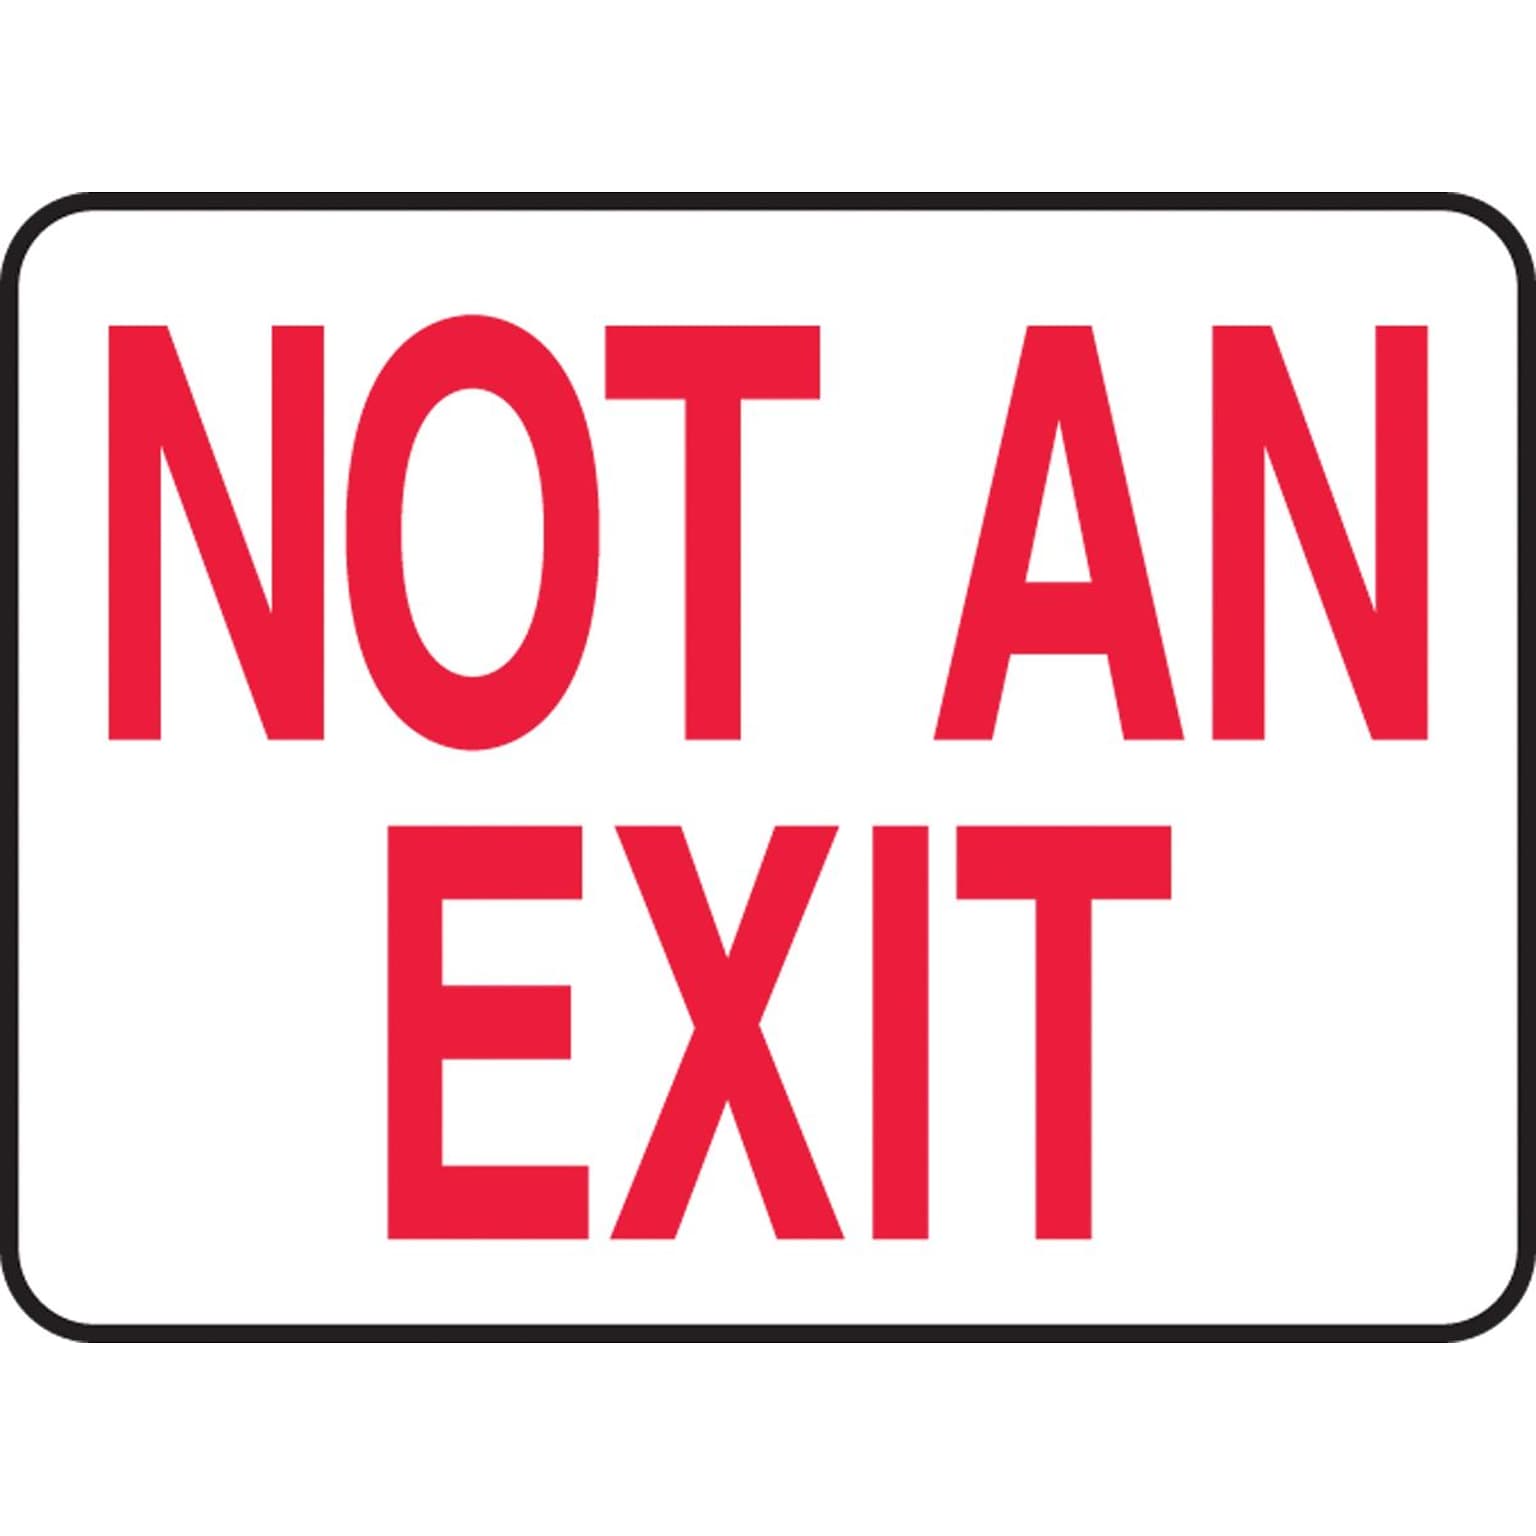 Accuform 10 x 14 Plastic Safety Sign NOT AN EXIT, Red On White (MEXT911VP)